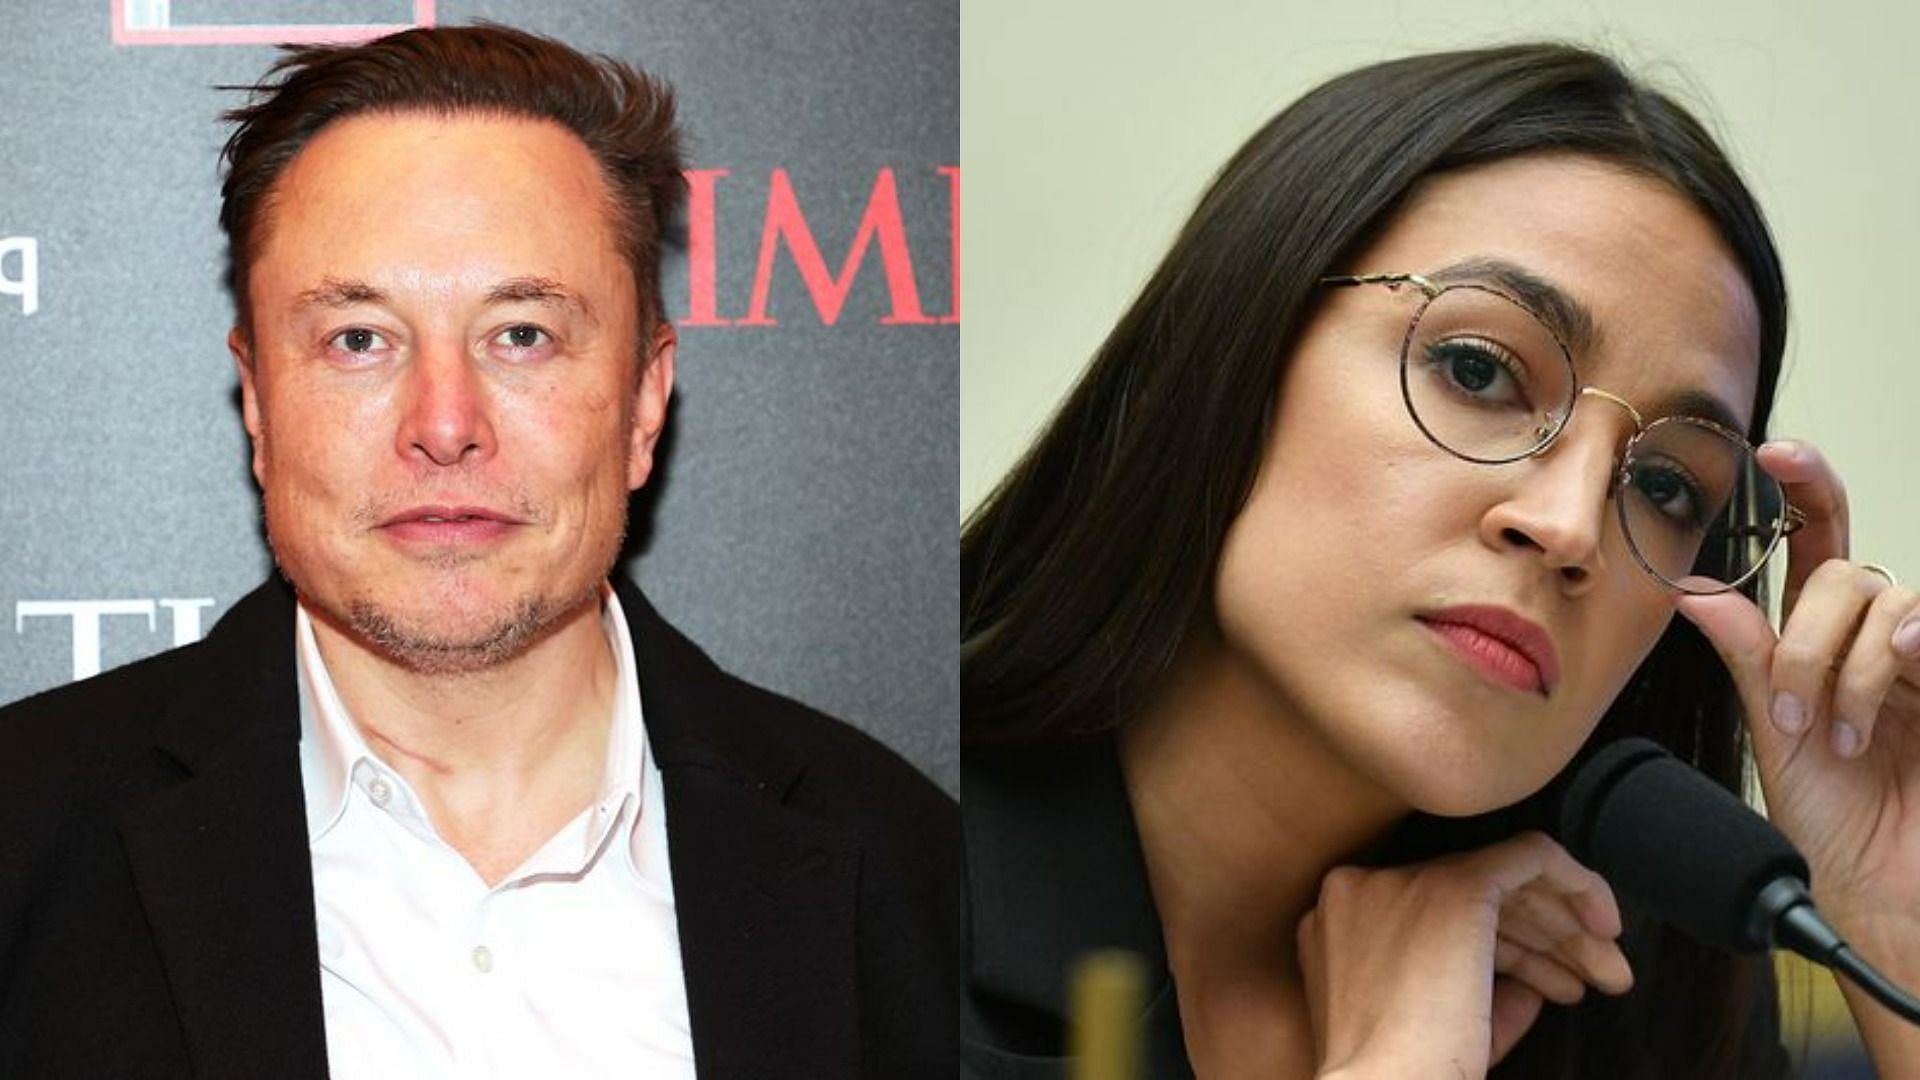 Elon Musk and AOC involve themselves in an online spat (Image via Theo Wargo/Getty Images and Mandel Ngan/AFP)